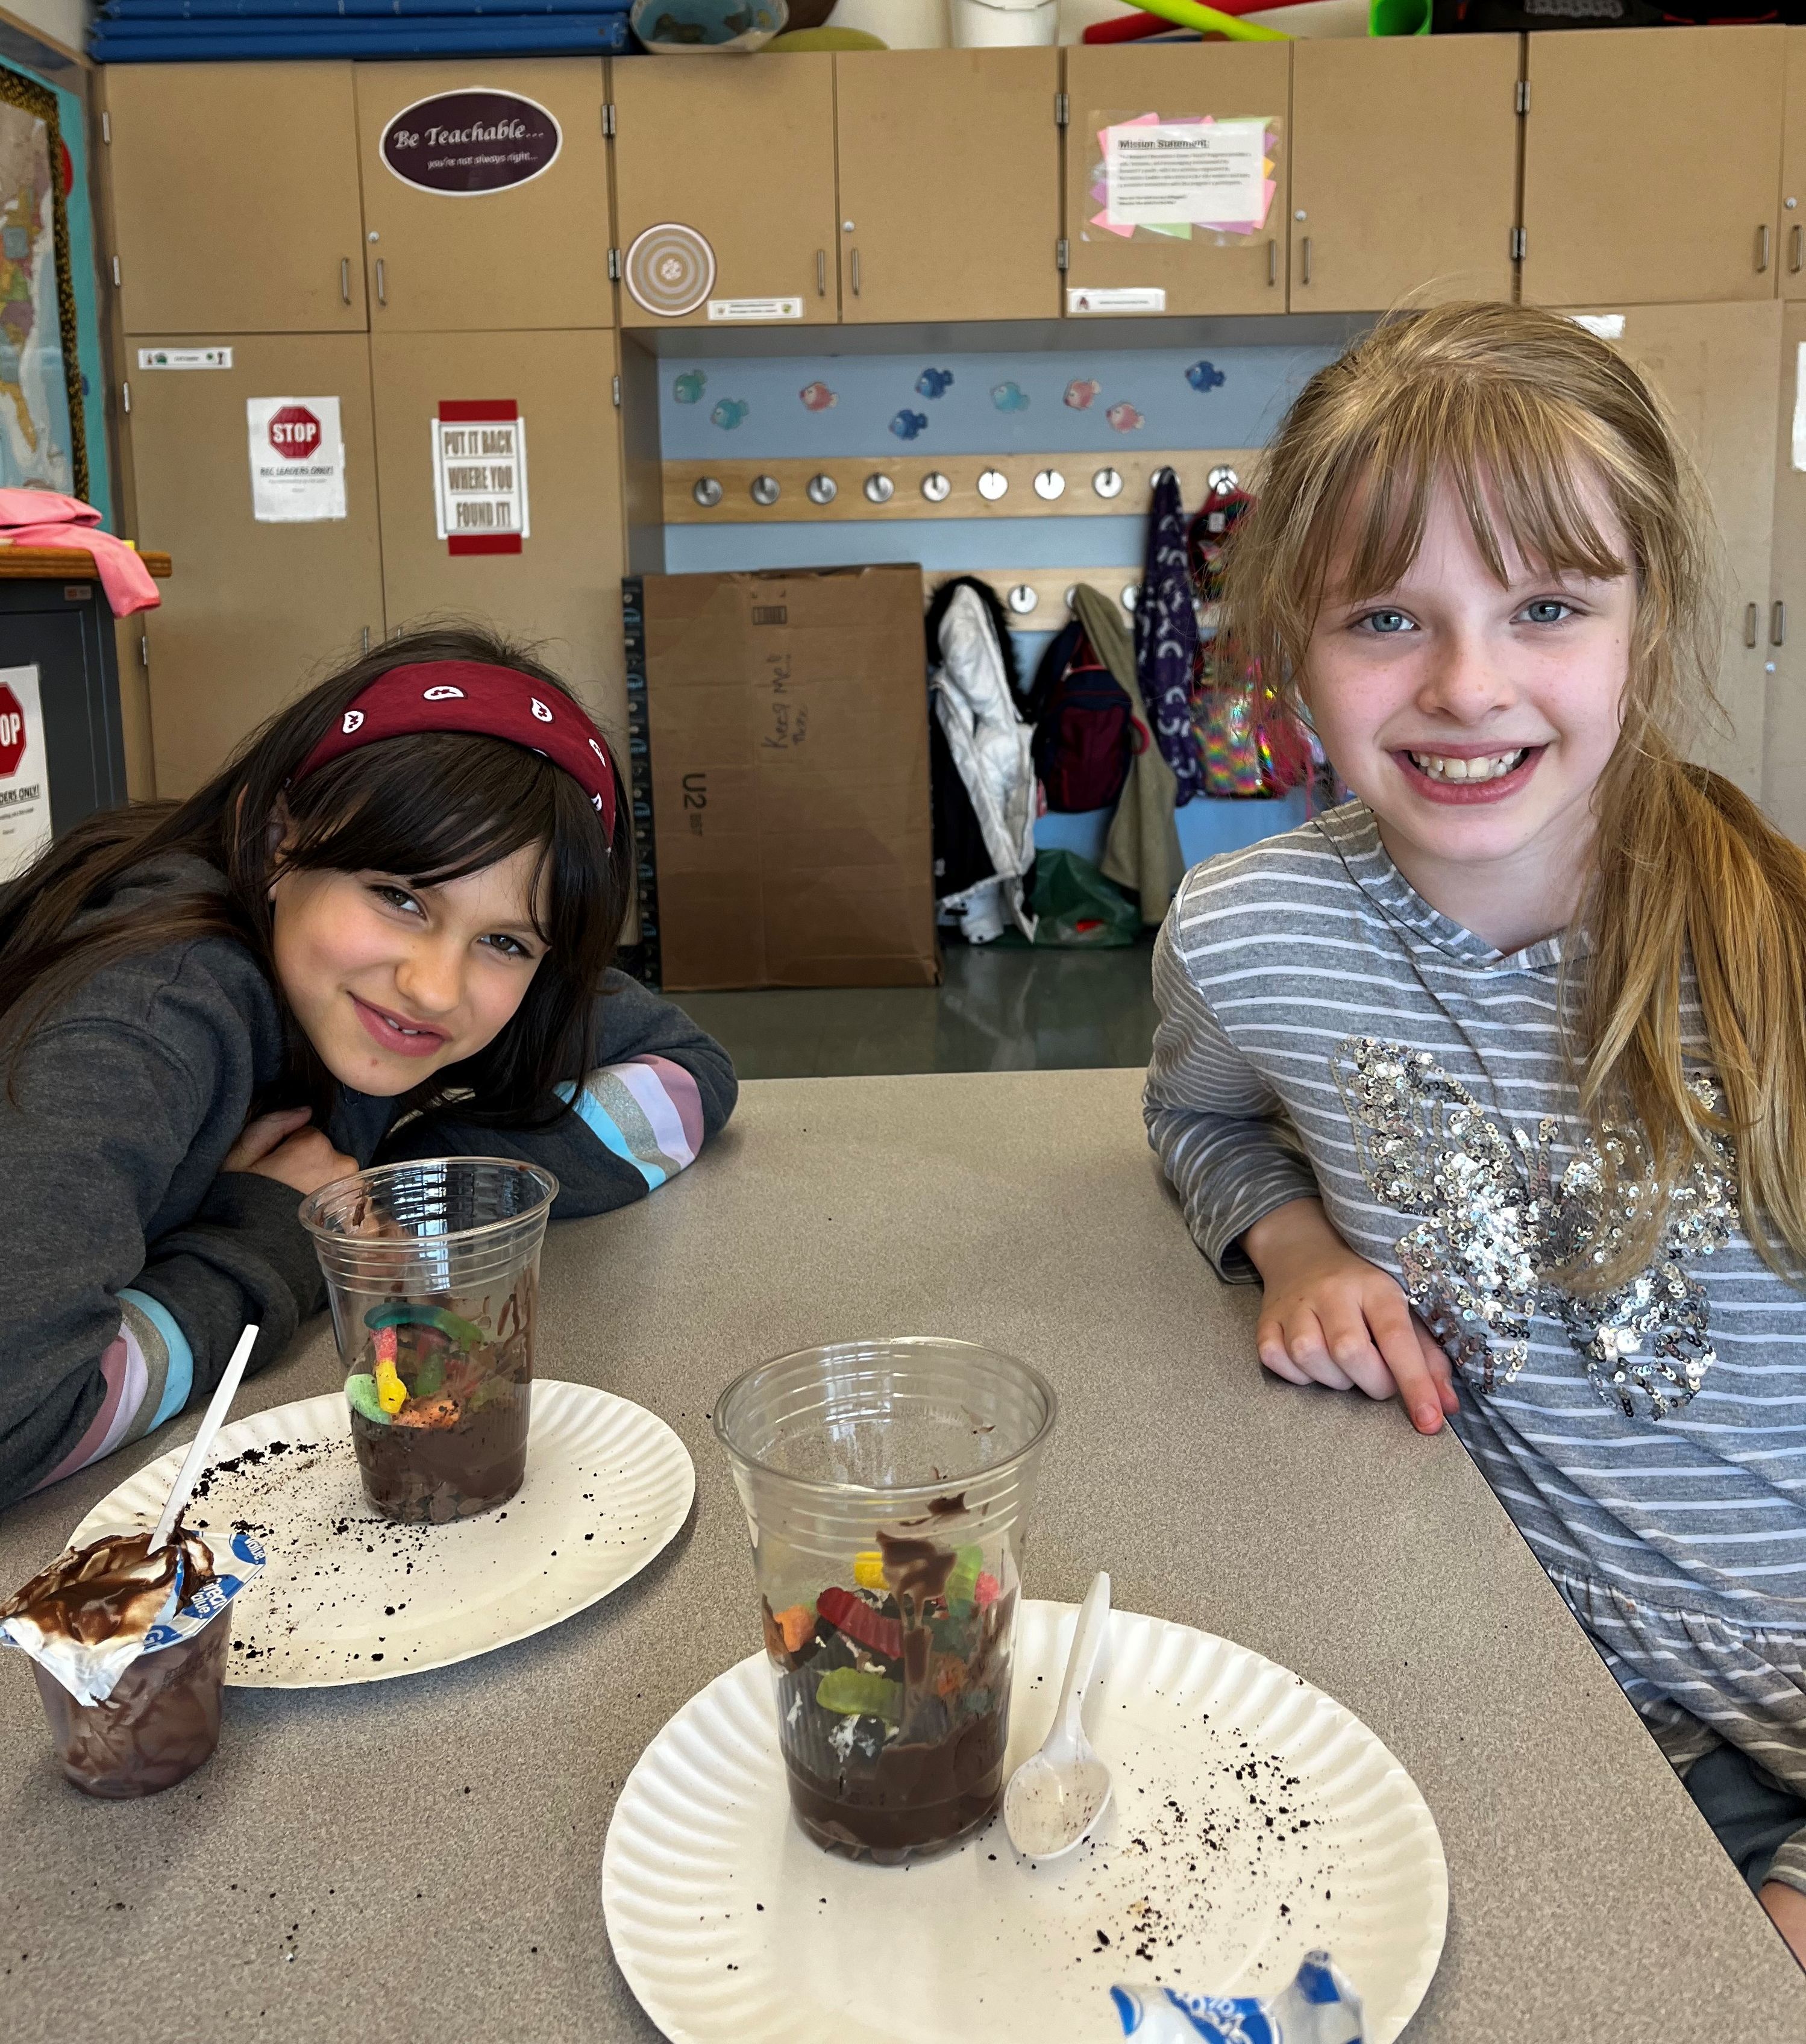 two girls having fun making soil models using pudding and gummy worms